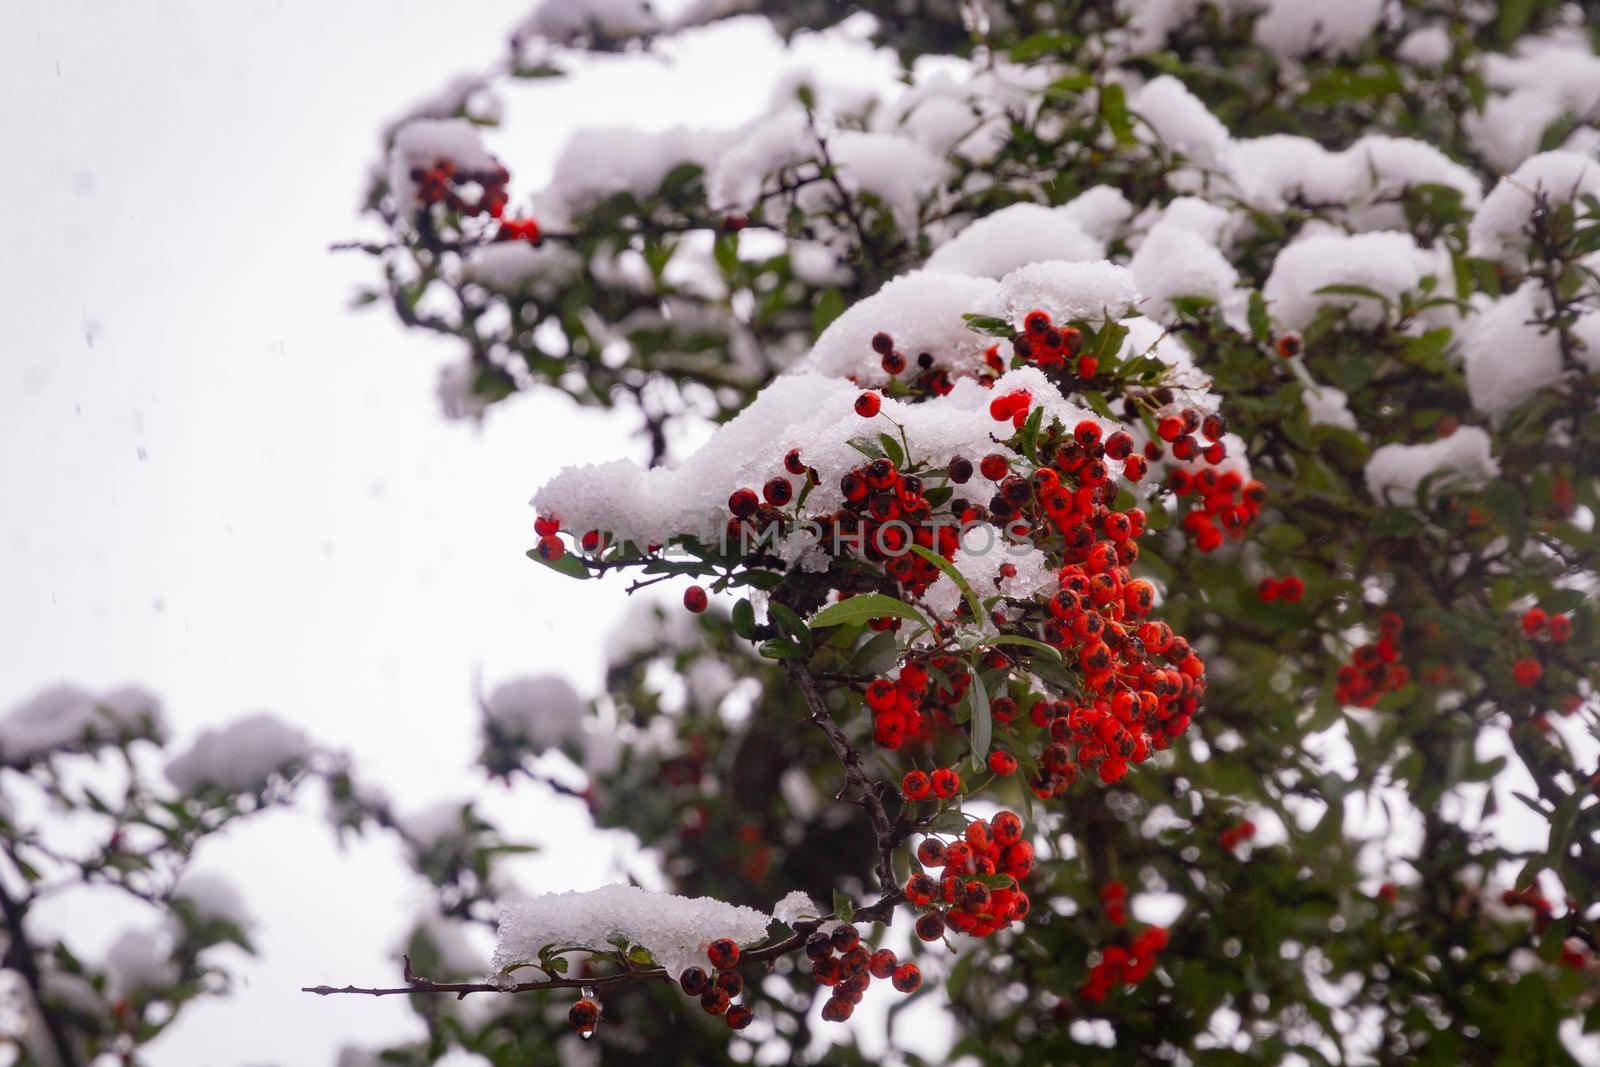 Detail of some red berries in a branch in a tree covered in the snow